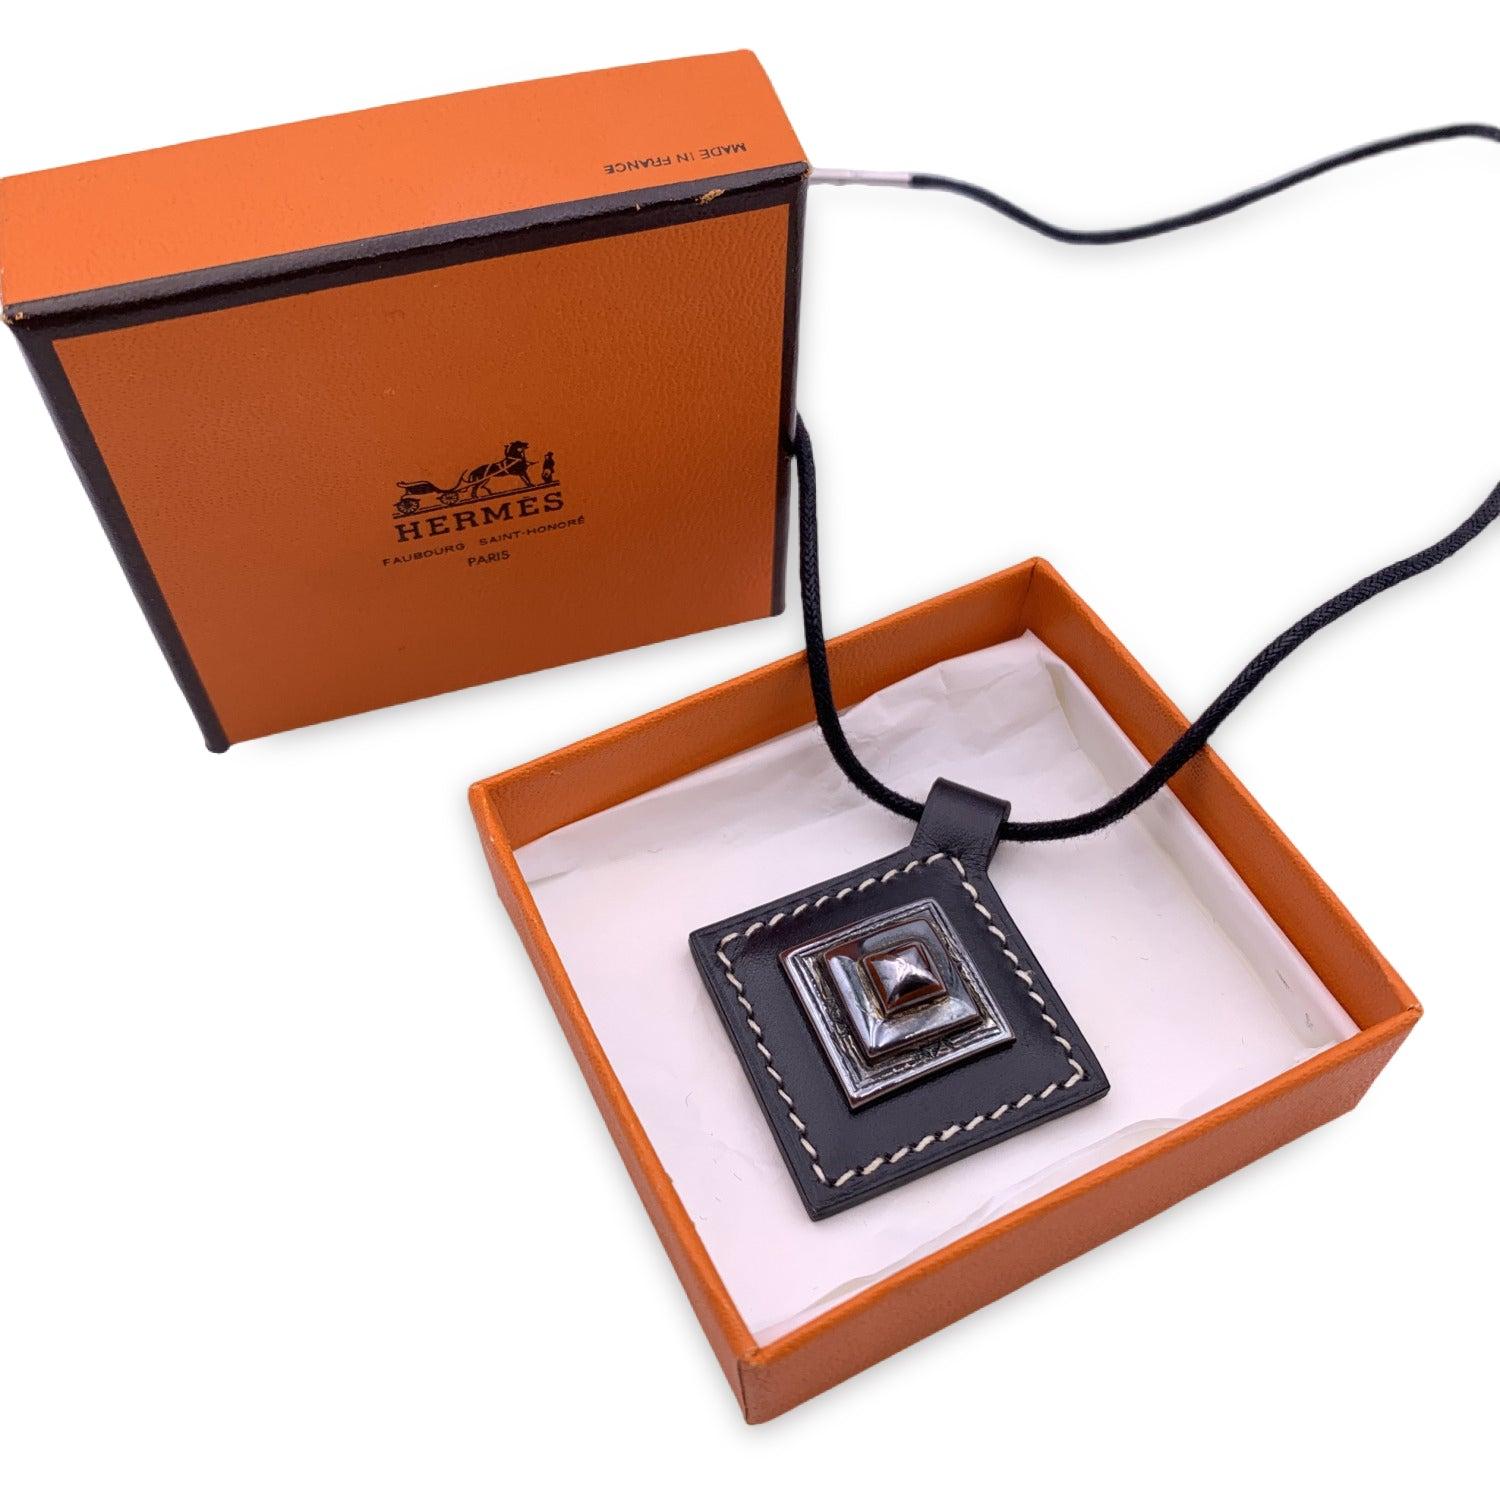 Beautiful rolle leather necklace 'Tuareg' by Hermes. Elegant black leather diamond shaped pendant with sterling silver piece. Turn lock closure. 'Hermes' engraved on the reverse of the necklace. Blind stamp is 'F' encased in a square (year of